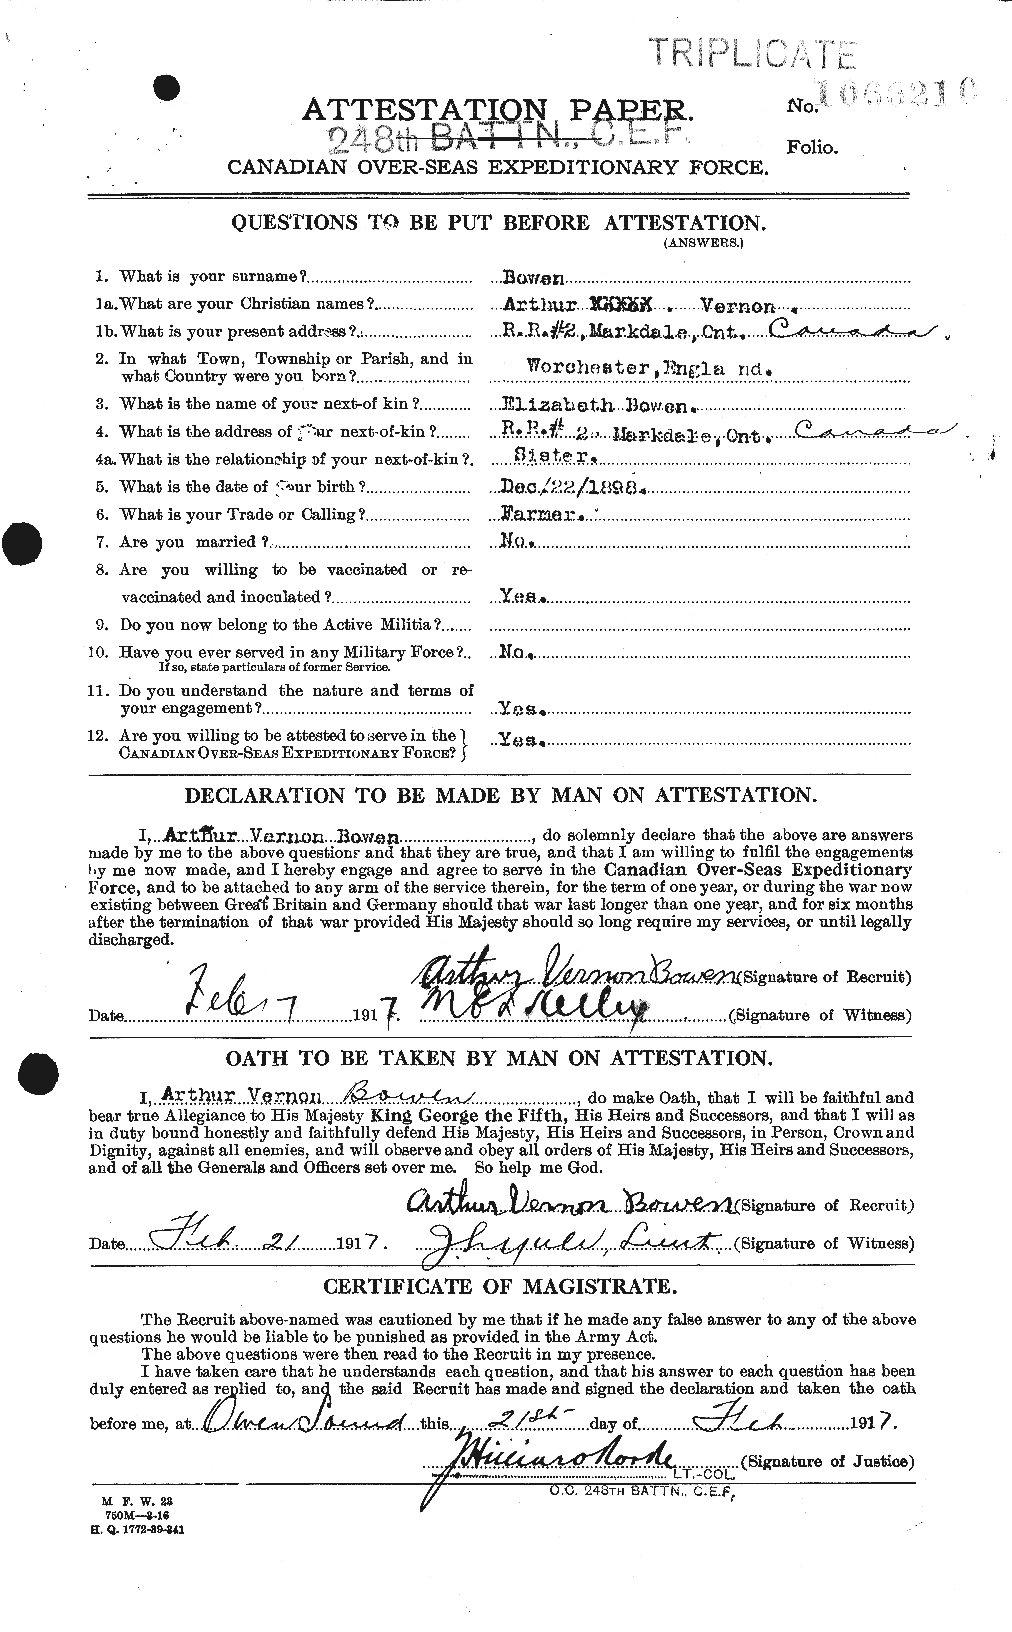 Personnel Records of the First World War - CEF 255356a